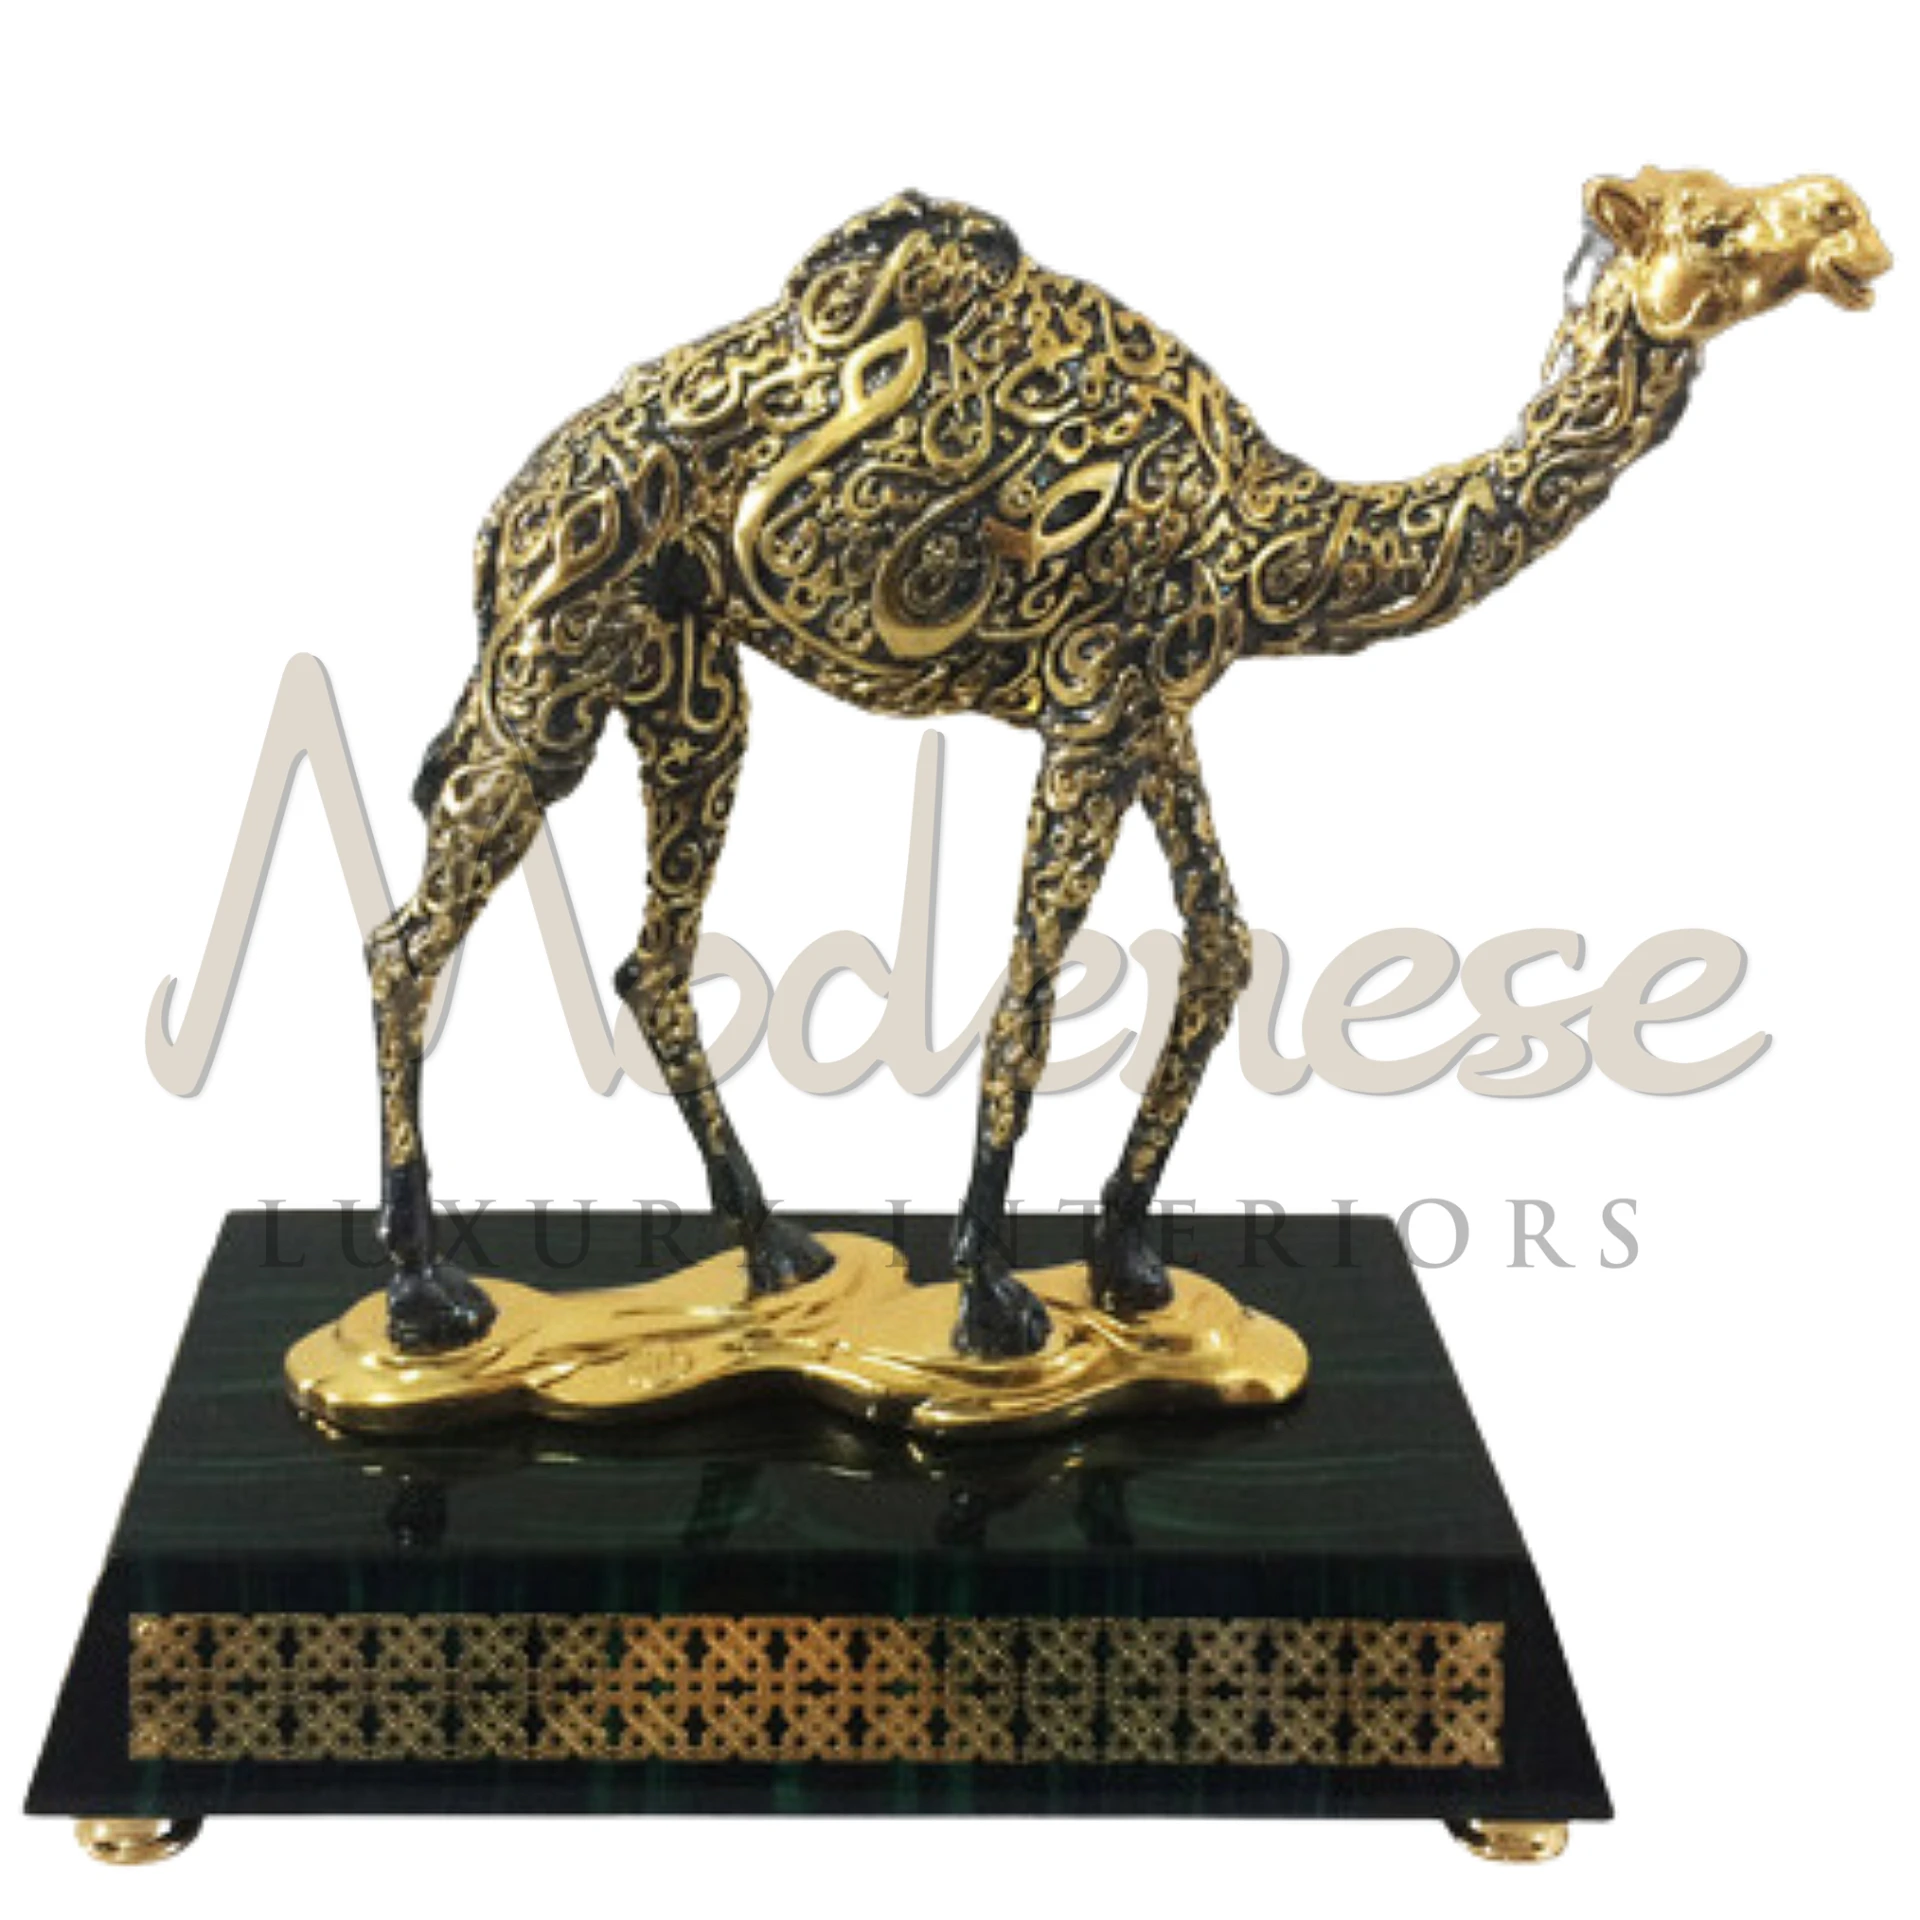 Royal Camel statue in brass, bronze, or marble, capturing the beauty and resilience of the desert creature, ideal for luxurious and classic interior décor.